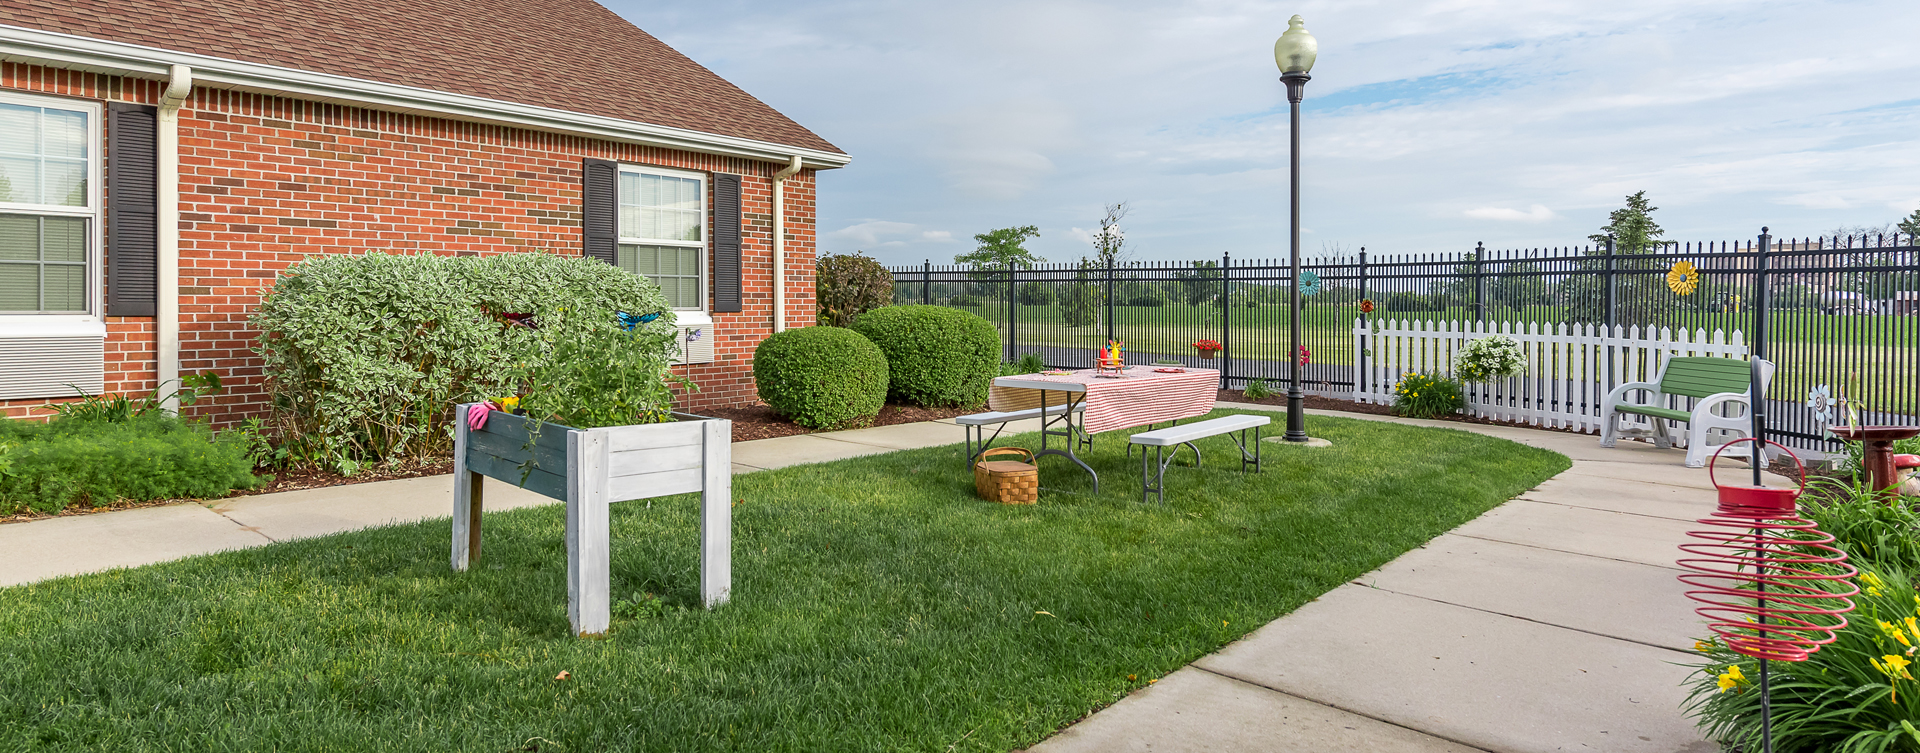 A single entrance courtyard gives residents with dementia the opportunity to be safe outside at Bickford of Saginaw Township